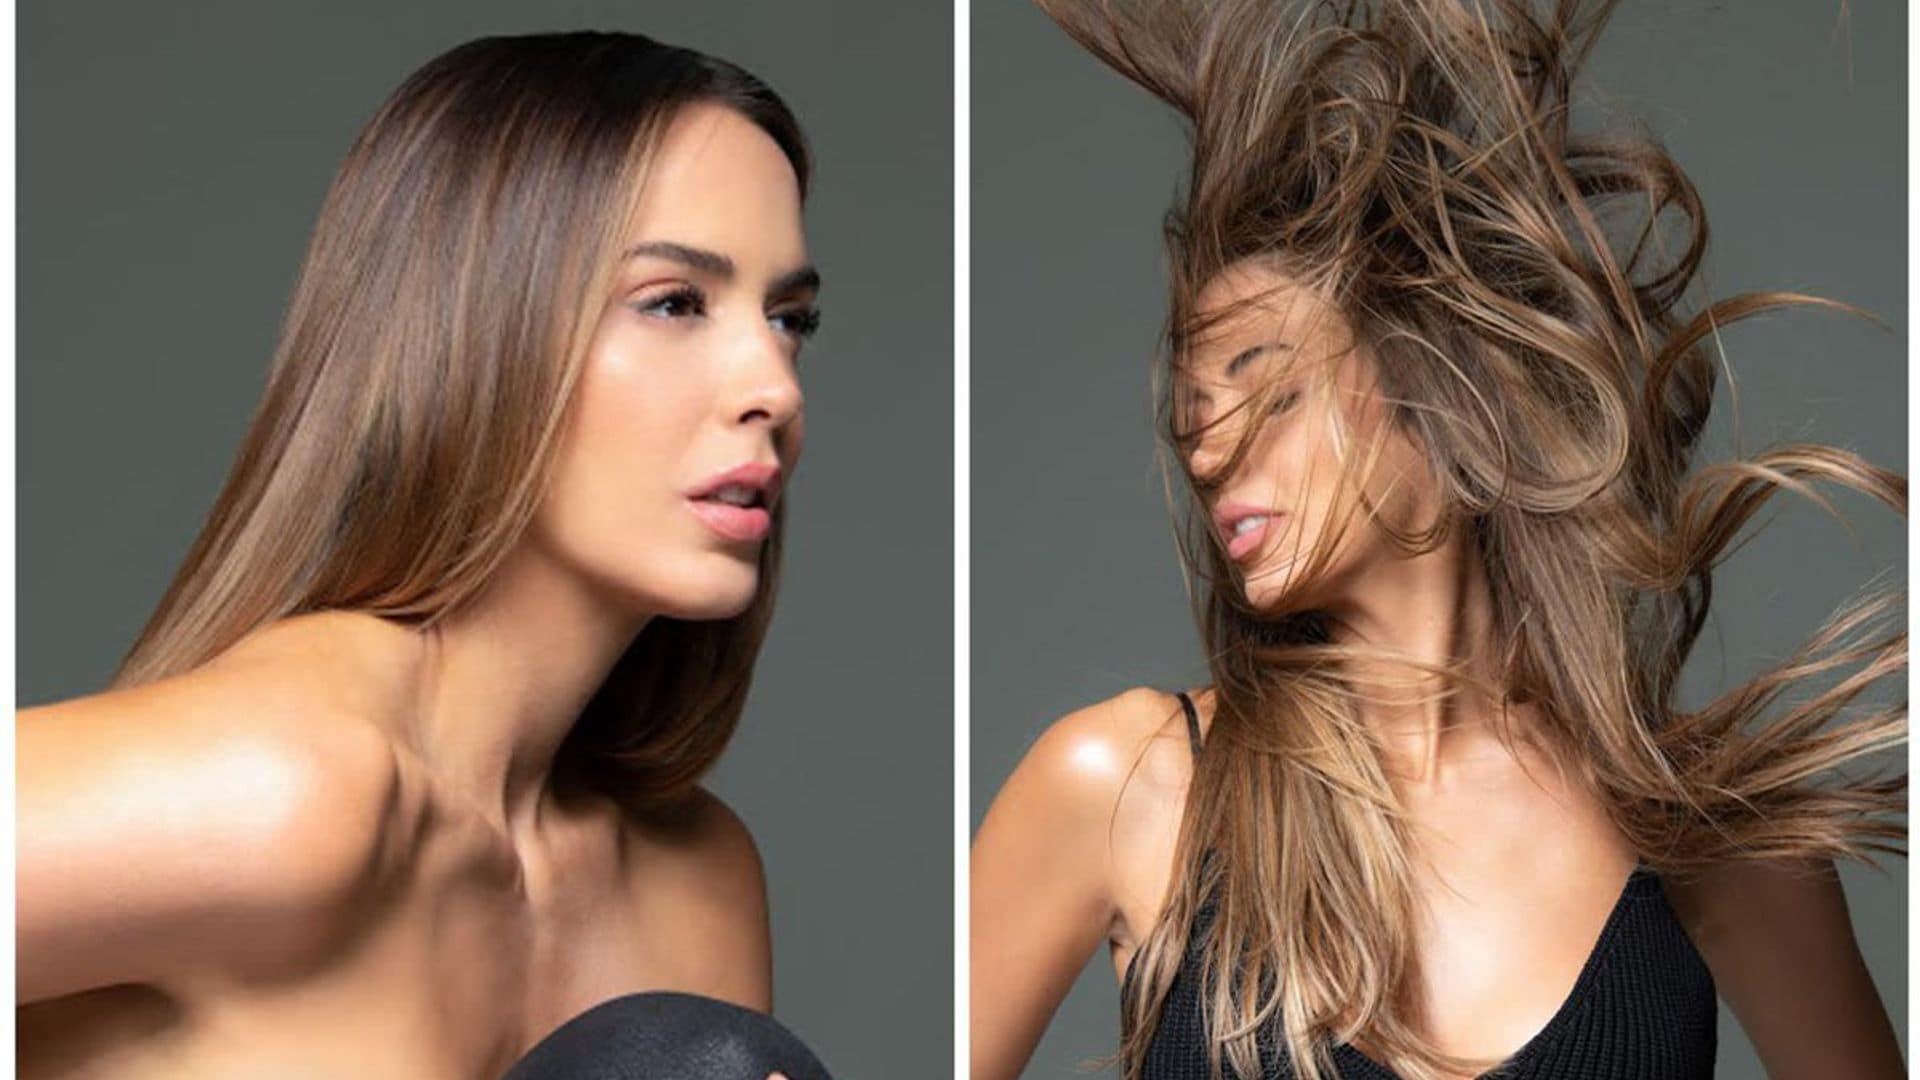 Shannon De Lima shares her amazing hair secrets in this exclusive interview